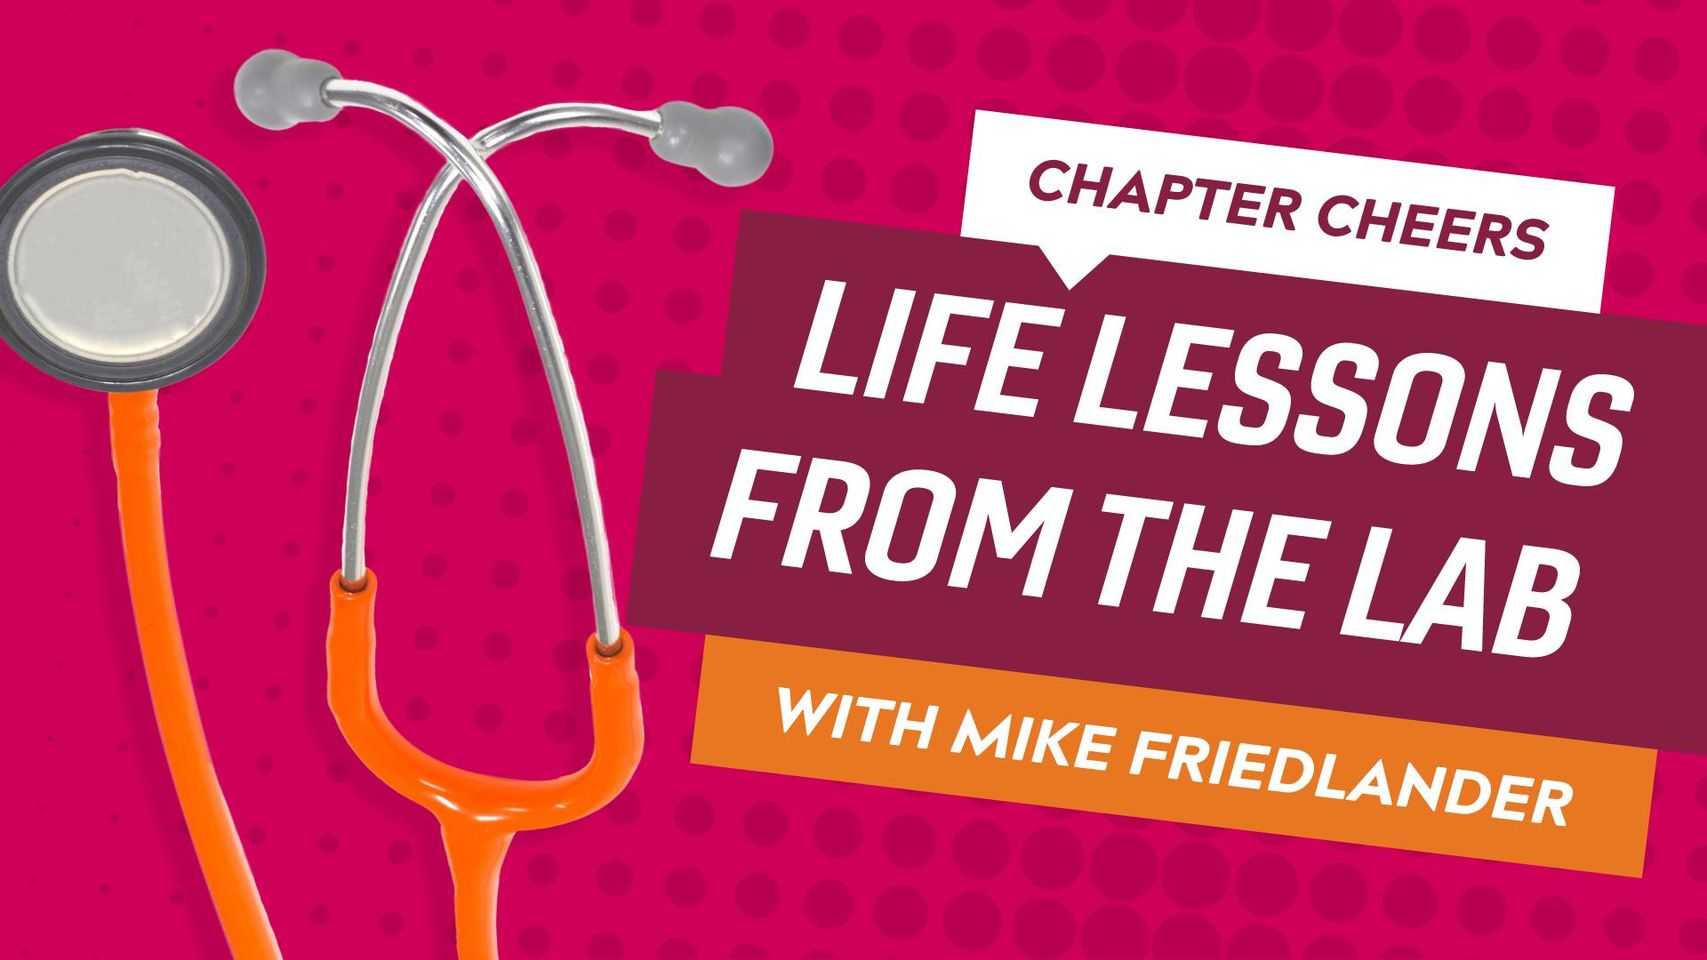 Chapter Cheers: Life Lessons from the Lab